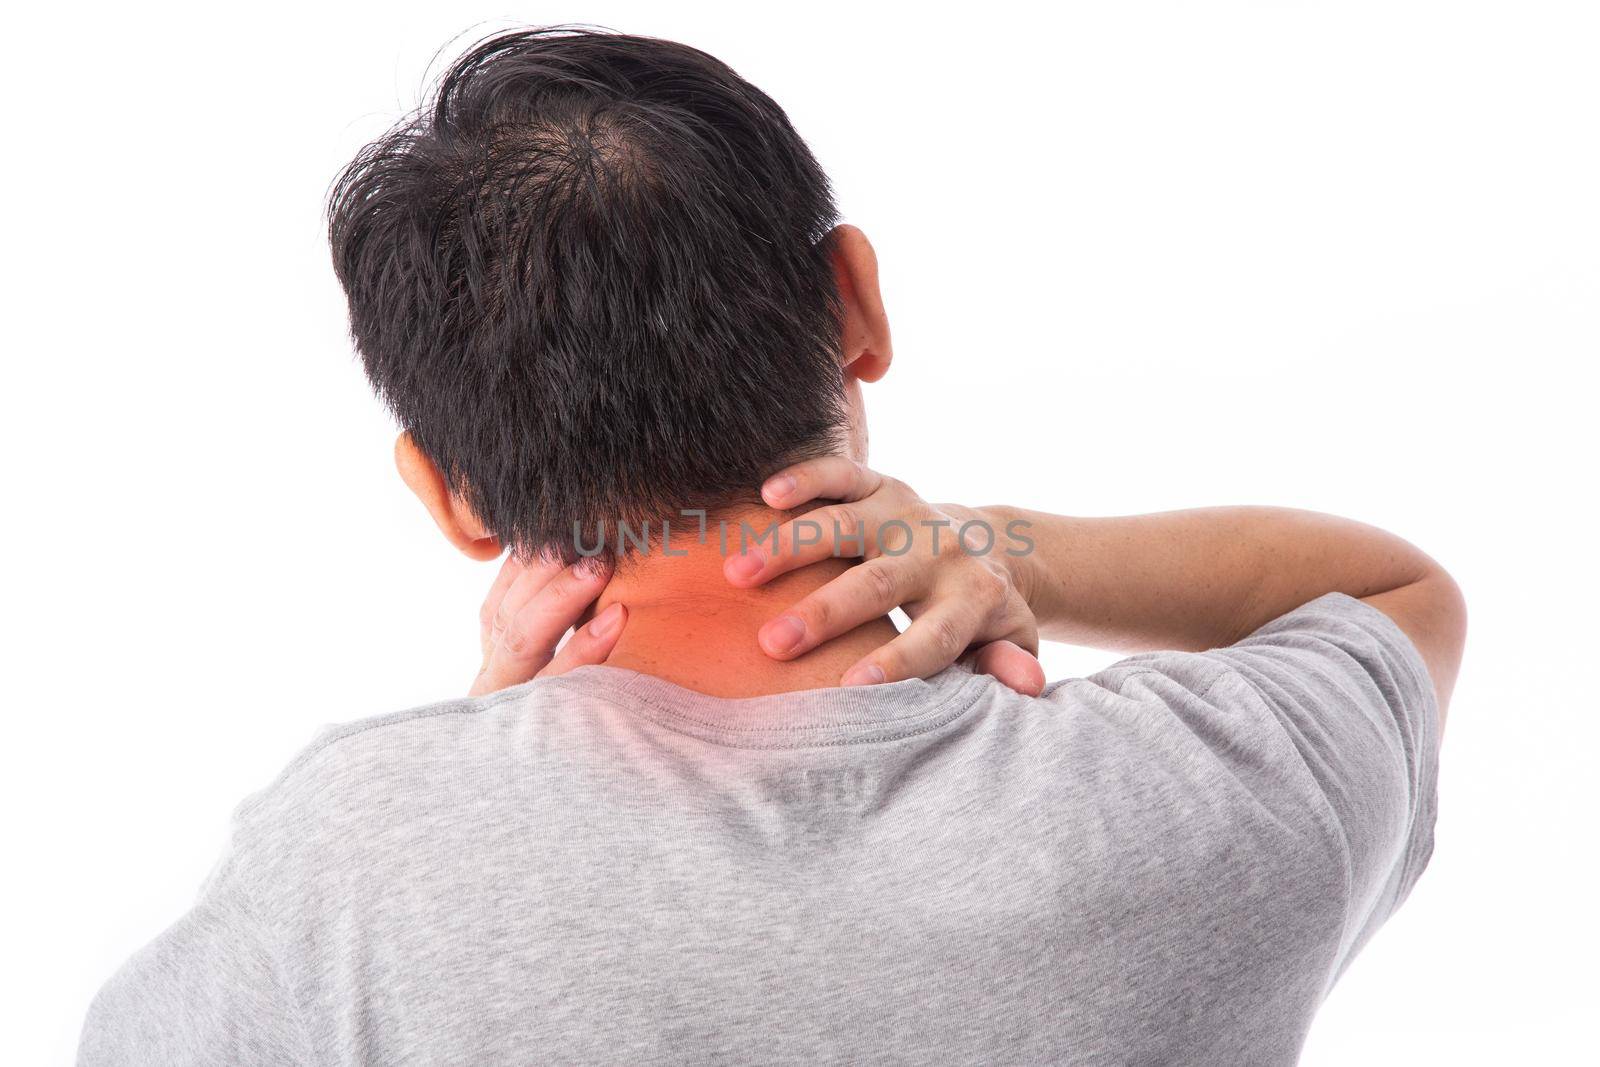 Sore pain of neck. Sprain and arthritis symptoms. middle age man holding his hurt neck by tehcheesiong